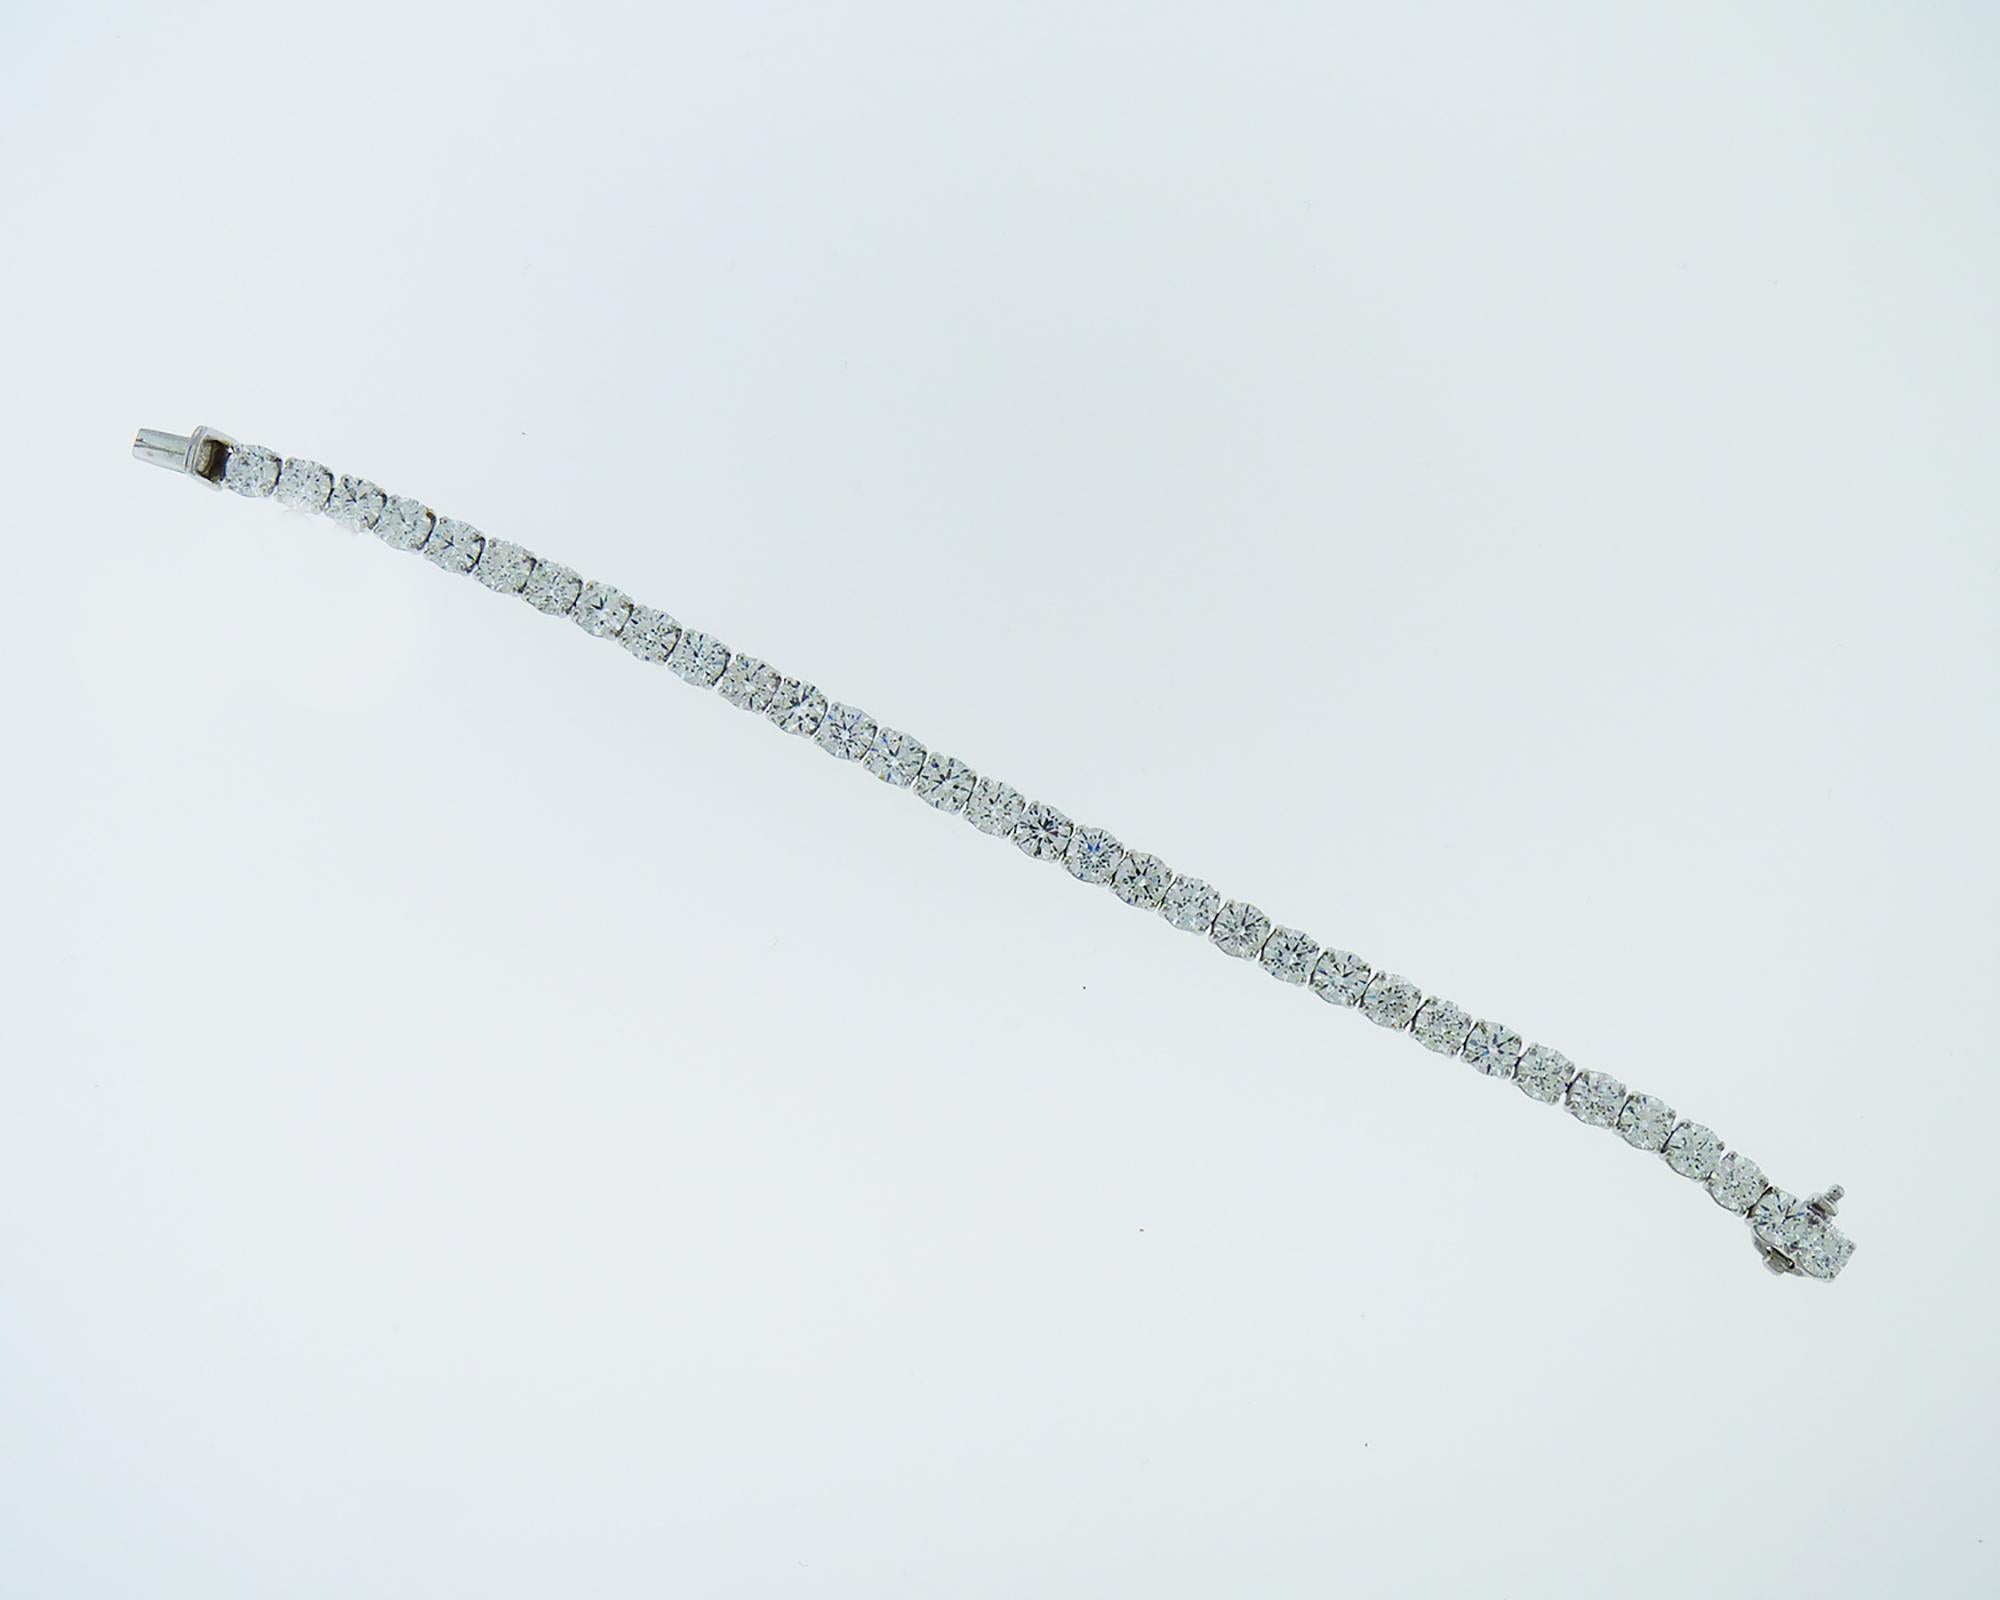 Elegant tennis bracelet embellished with 33 round diamonds, F-G colors, VVS-VS clarity.
Total weight of diamonds is 13.27 carats. 
Weight of the bracelet is 18.32 grams.
Metal is platinum.
Measurements:
L: 6.37 inches (16.2 cm)
W: 0.19 inches (0.5